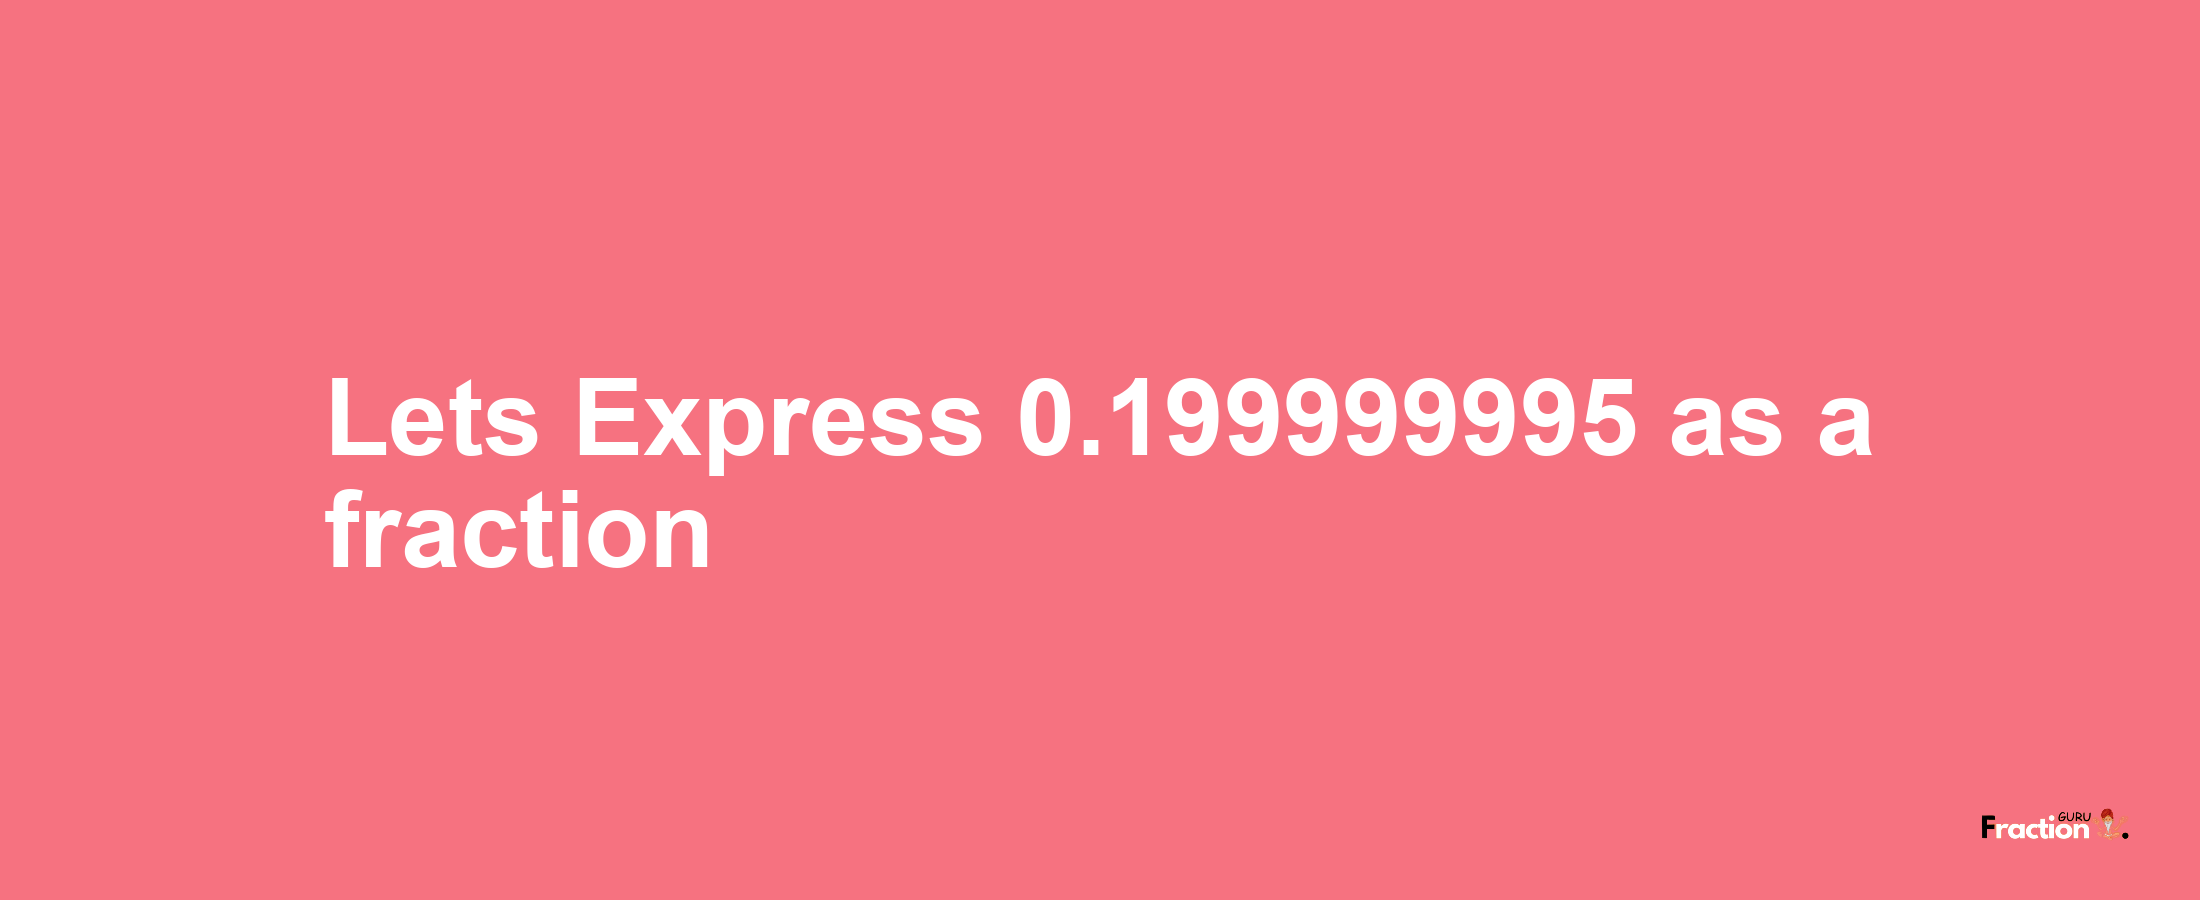 Lets Express 0.199999995 as afraction